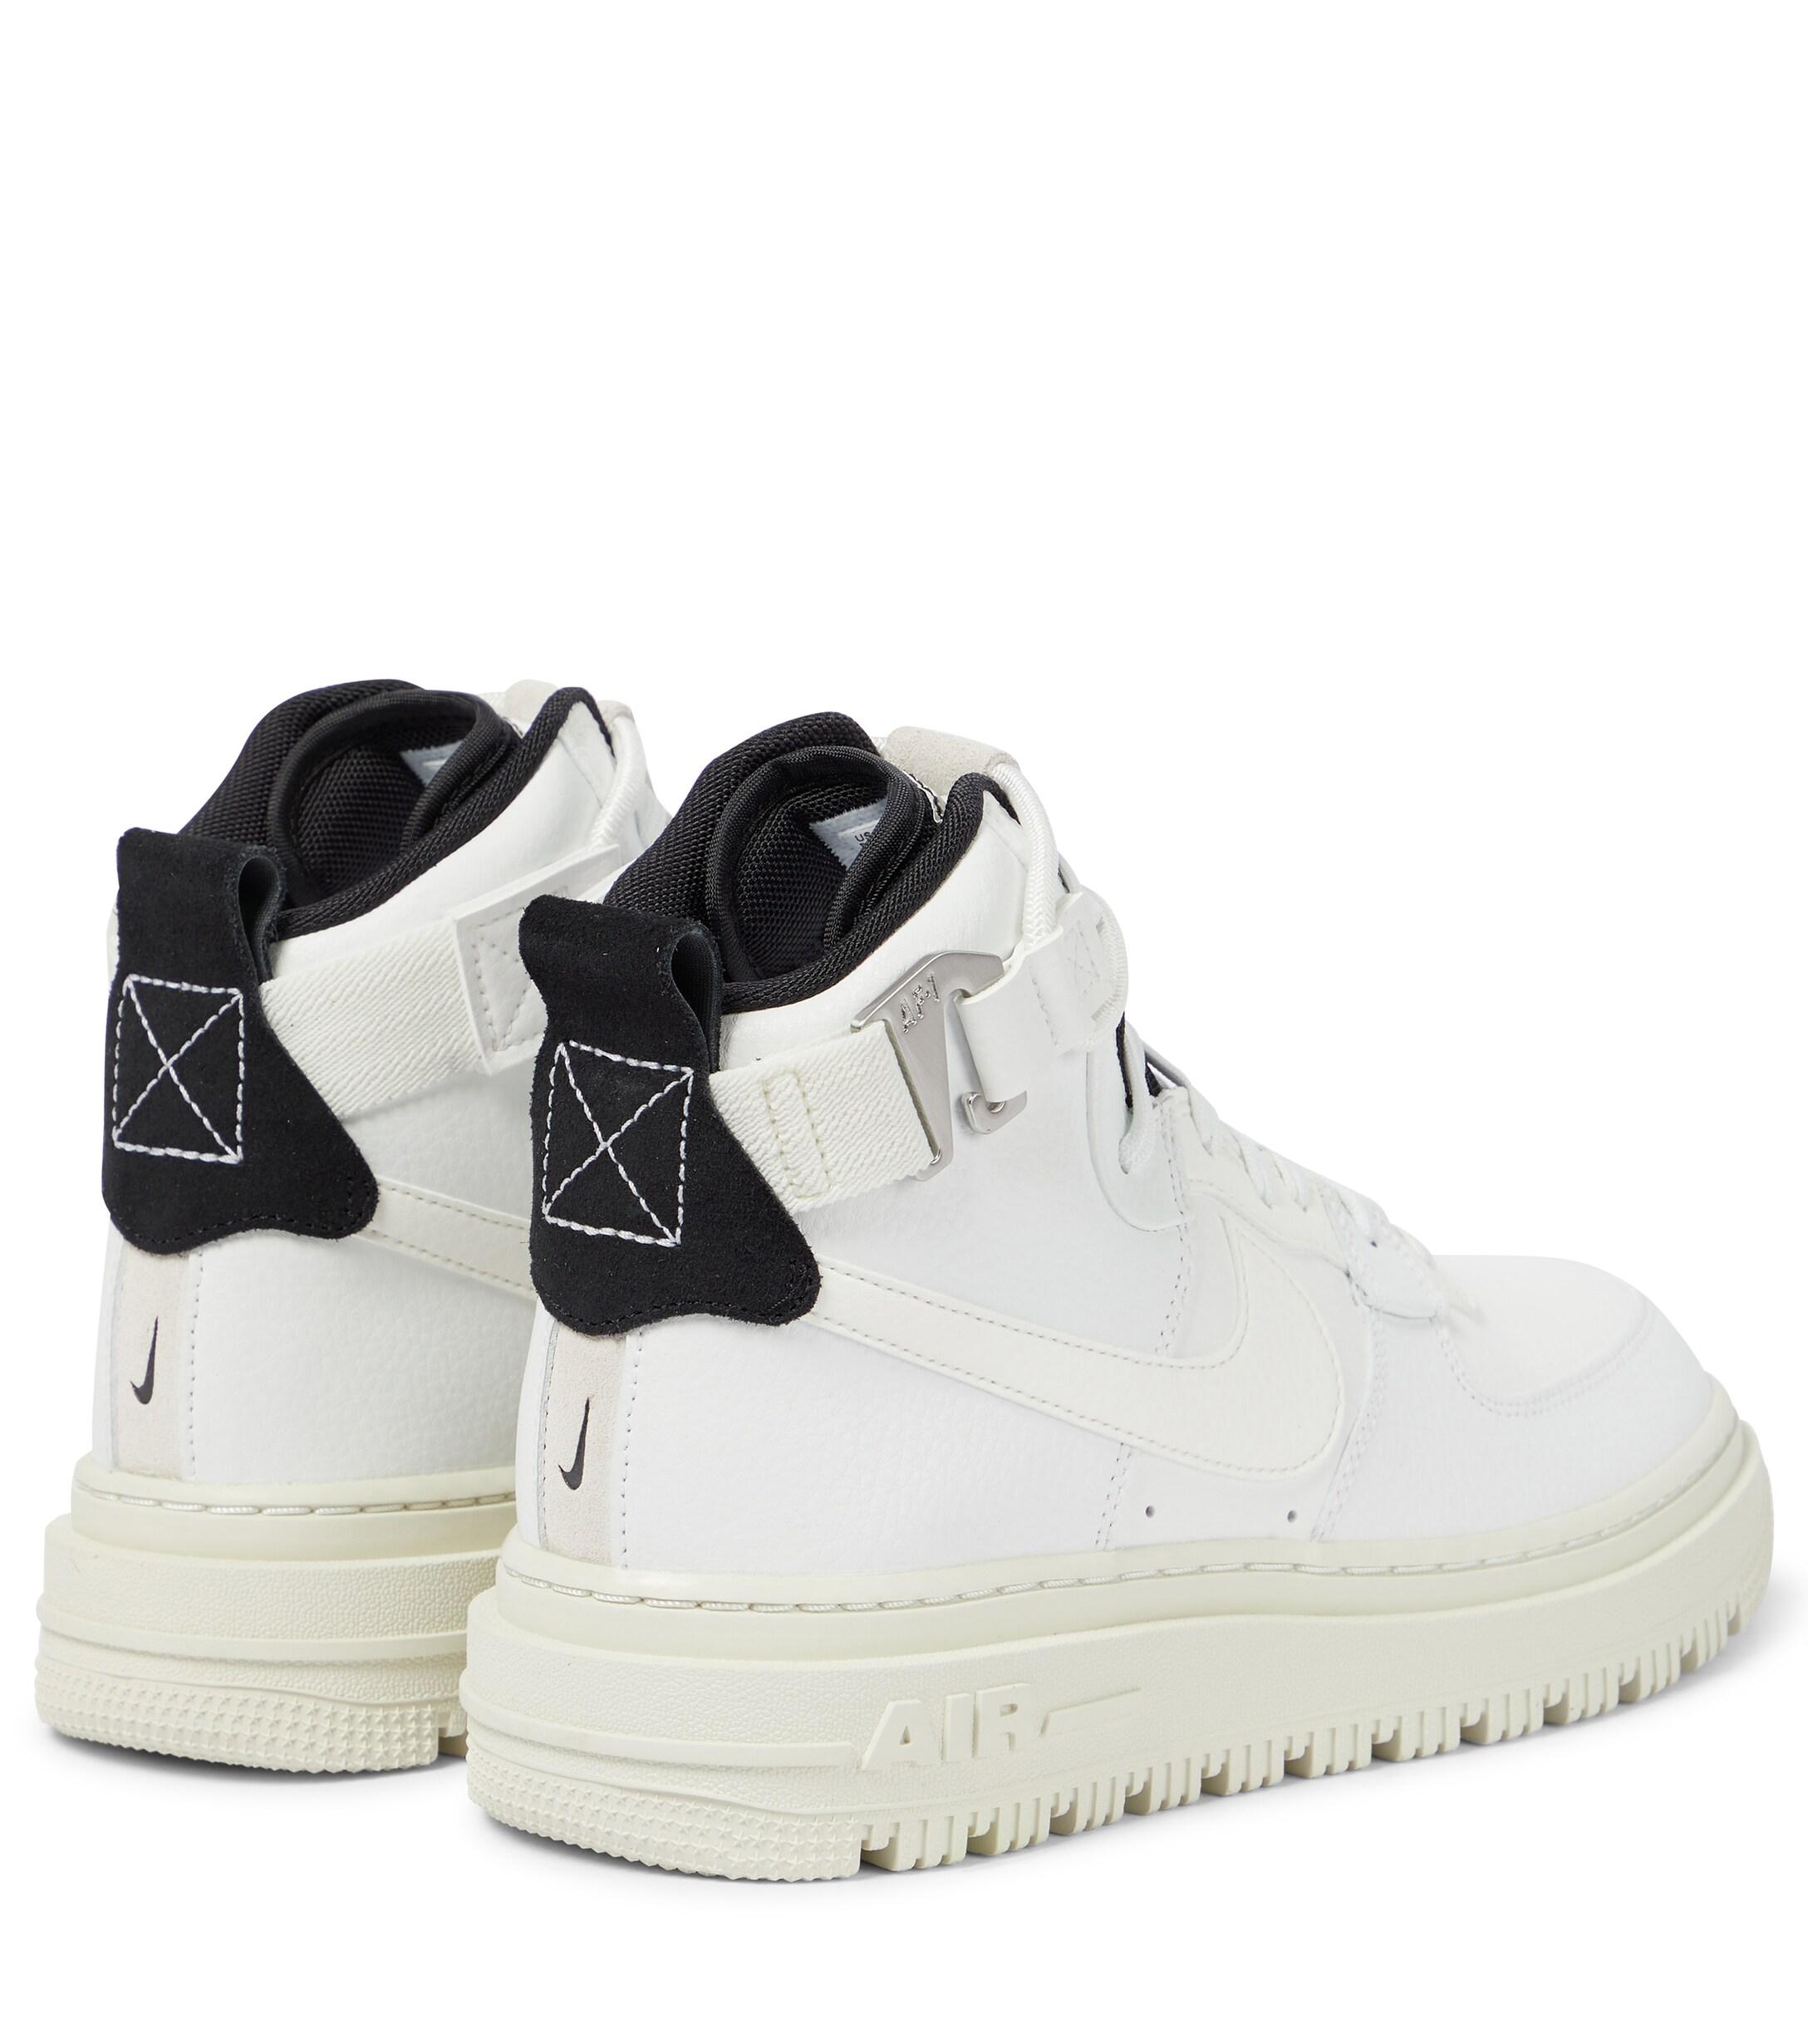 Nike Leather Air Force 1 High Utility 2.0 Sneakers in White - Lyst